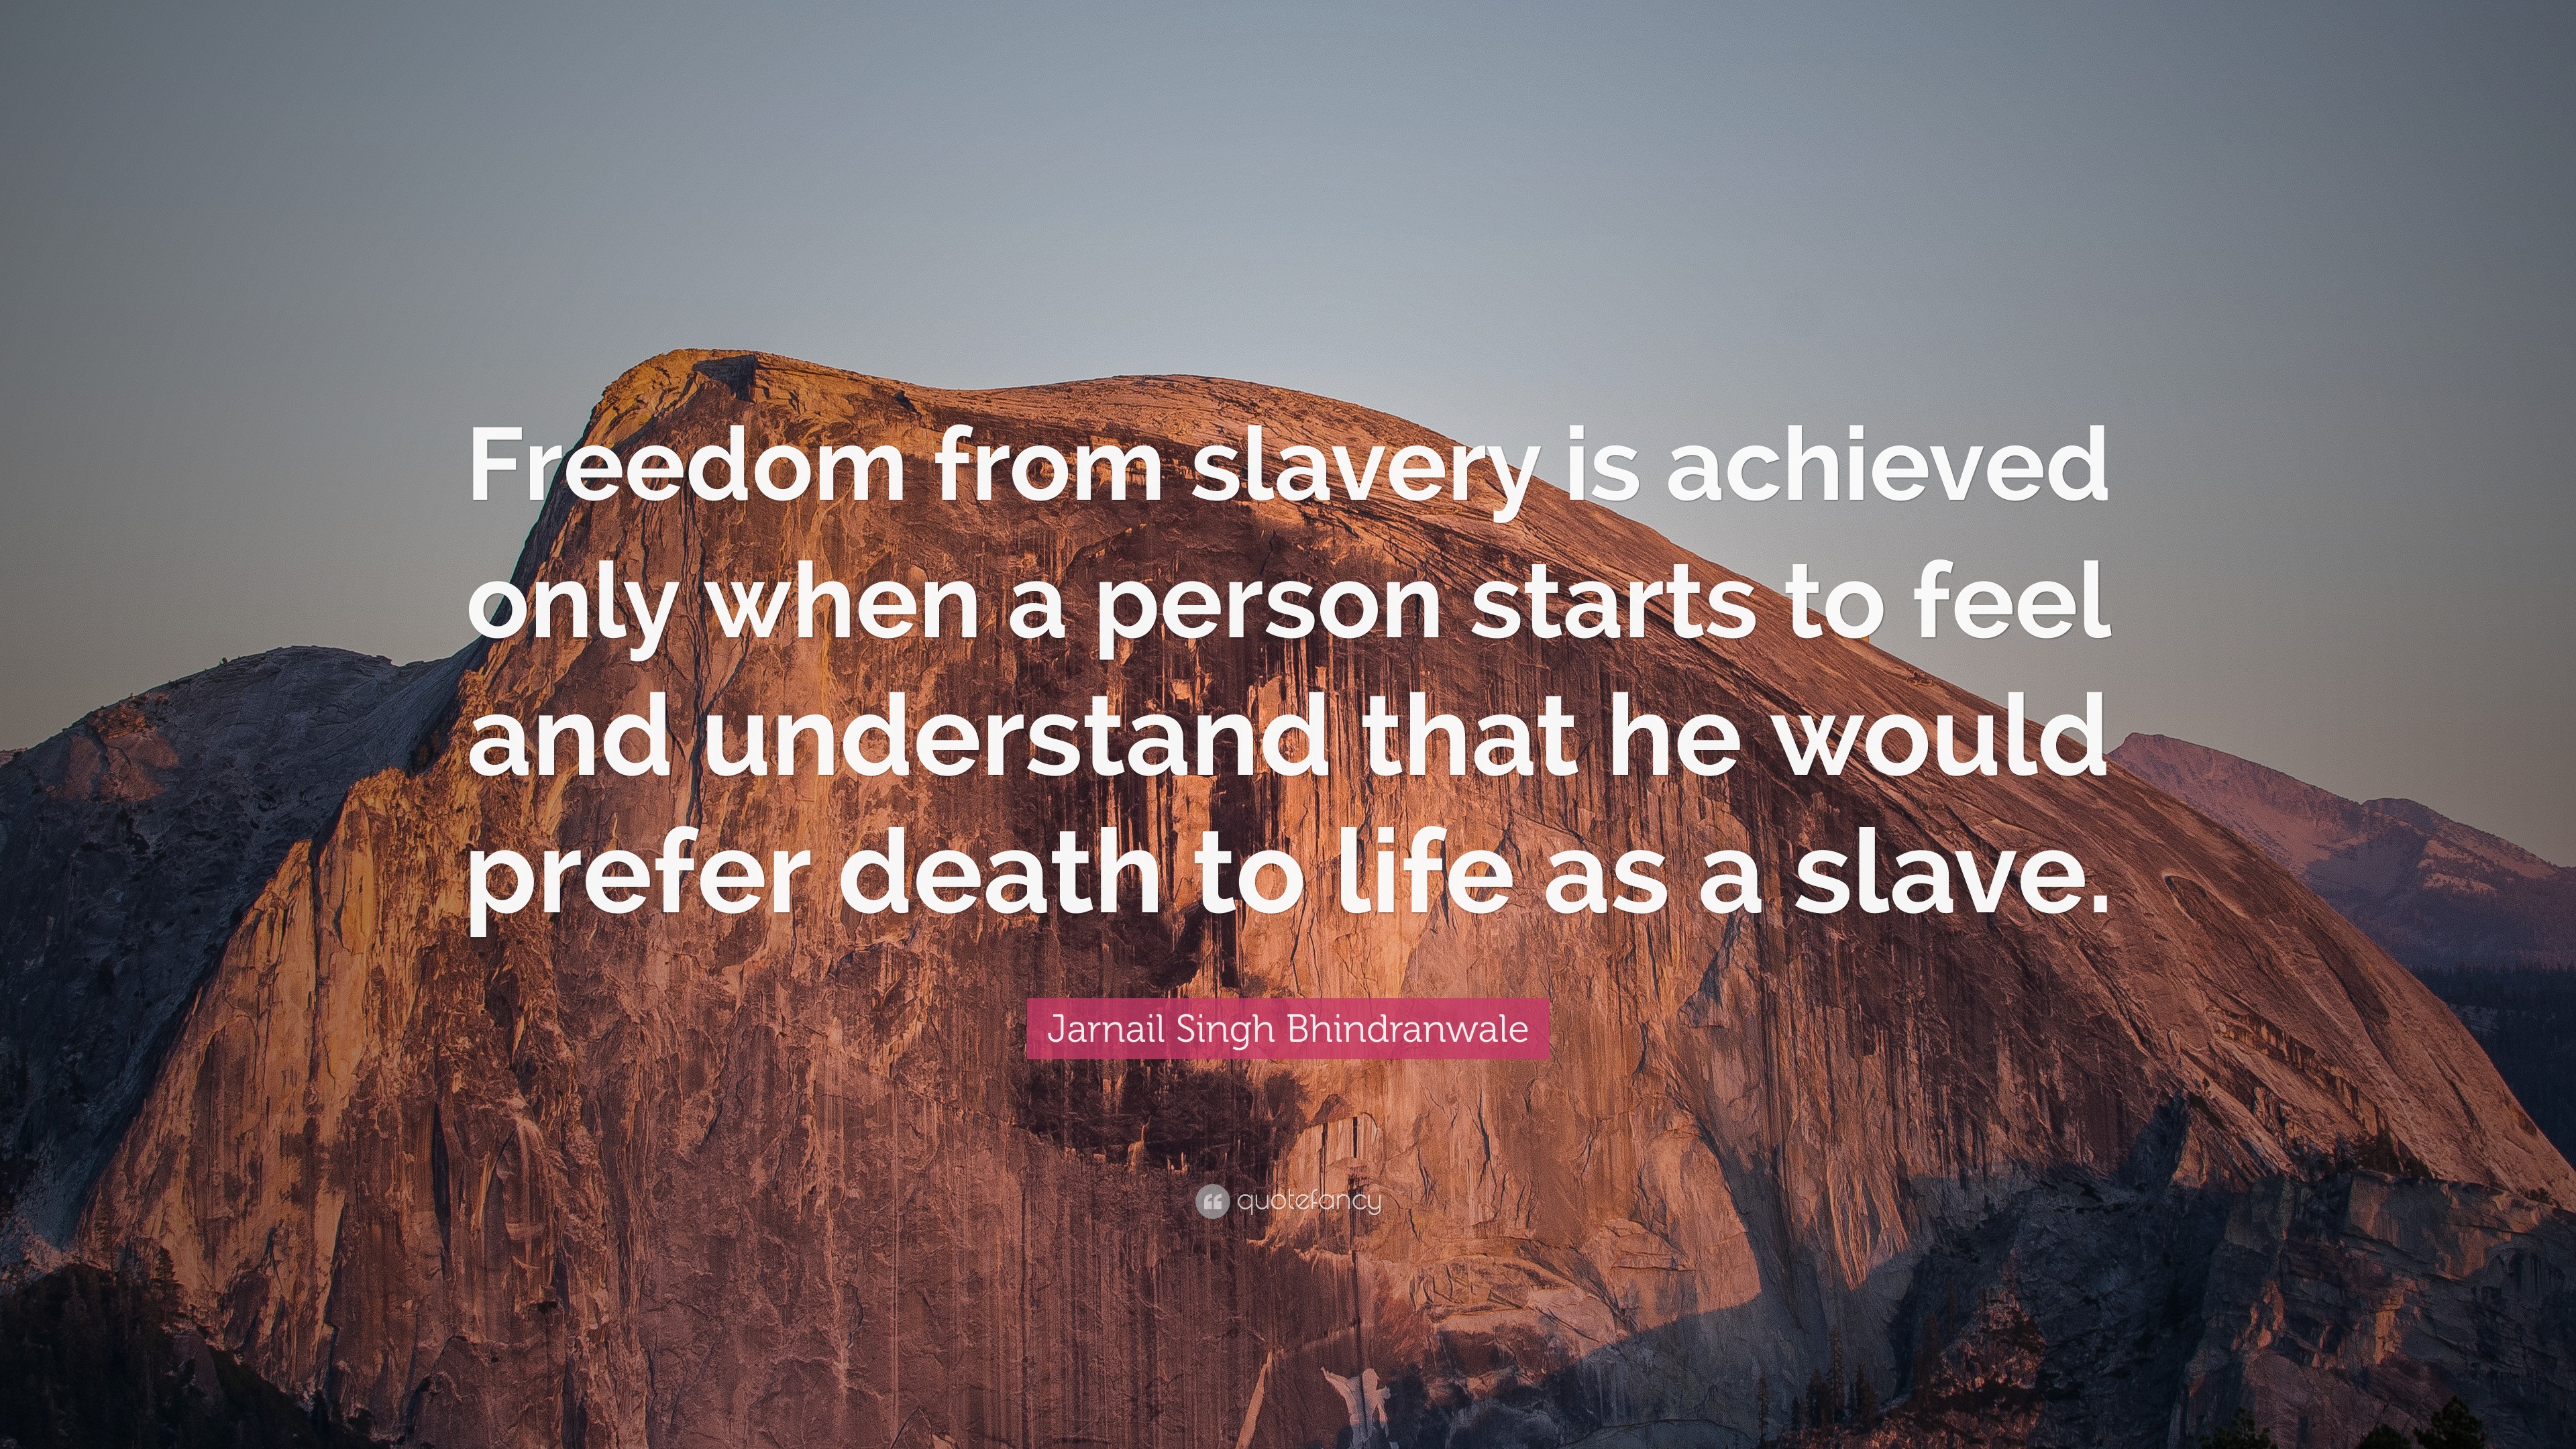 Jarnail Singh Bhindranwale Quote “Freedom from slavery is